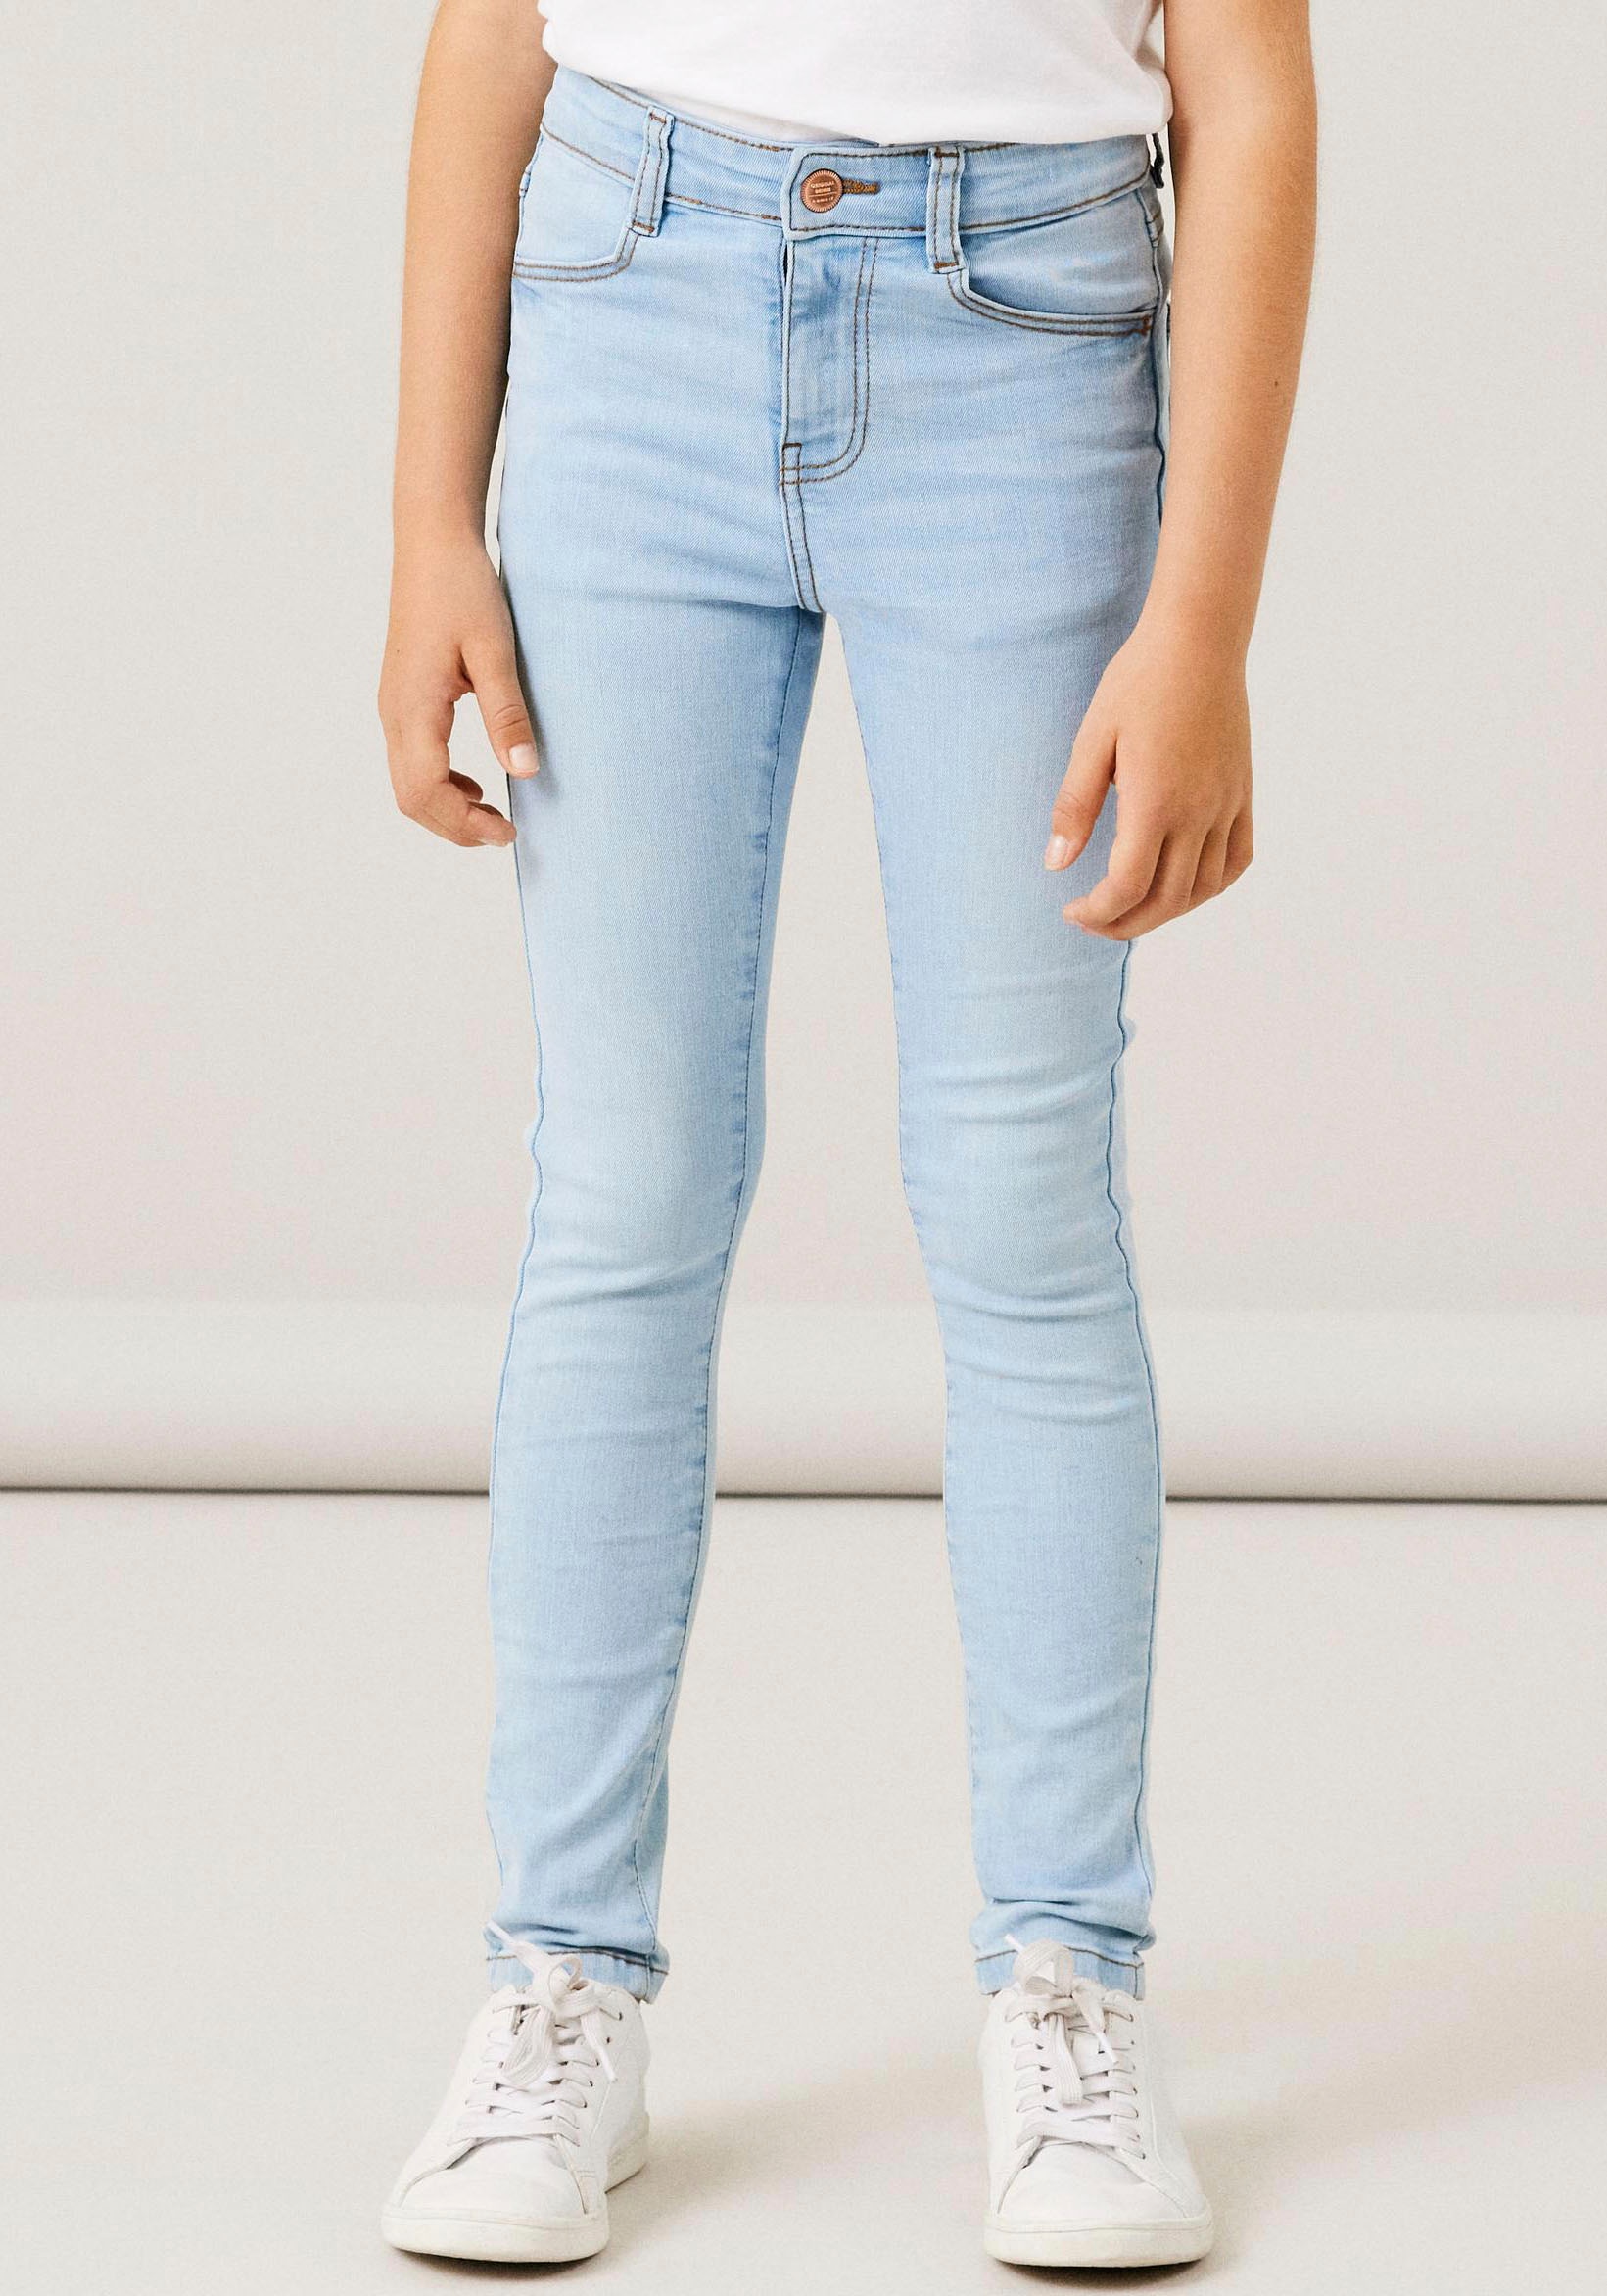 HW »NKFPOLLY mit Name It Trendige Stretch Skinny-fit-Jeans SKINNY Mindestbestellwert ohne shoppen 1180-ST JEANS NOOS«,